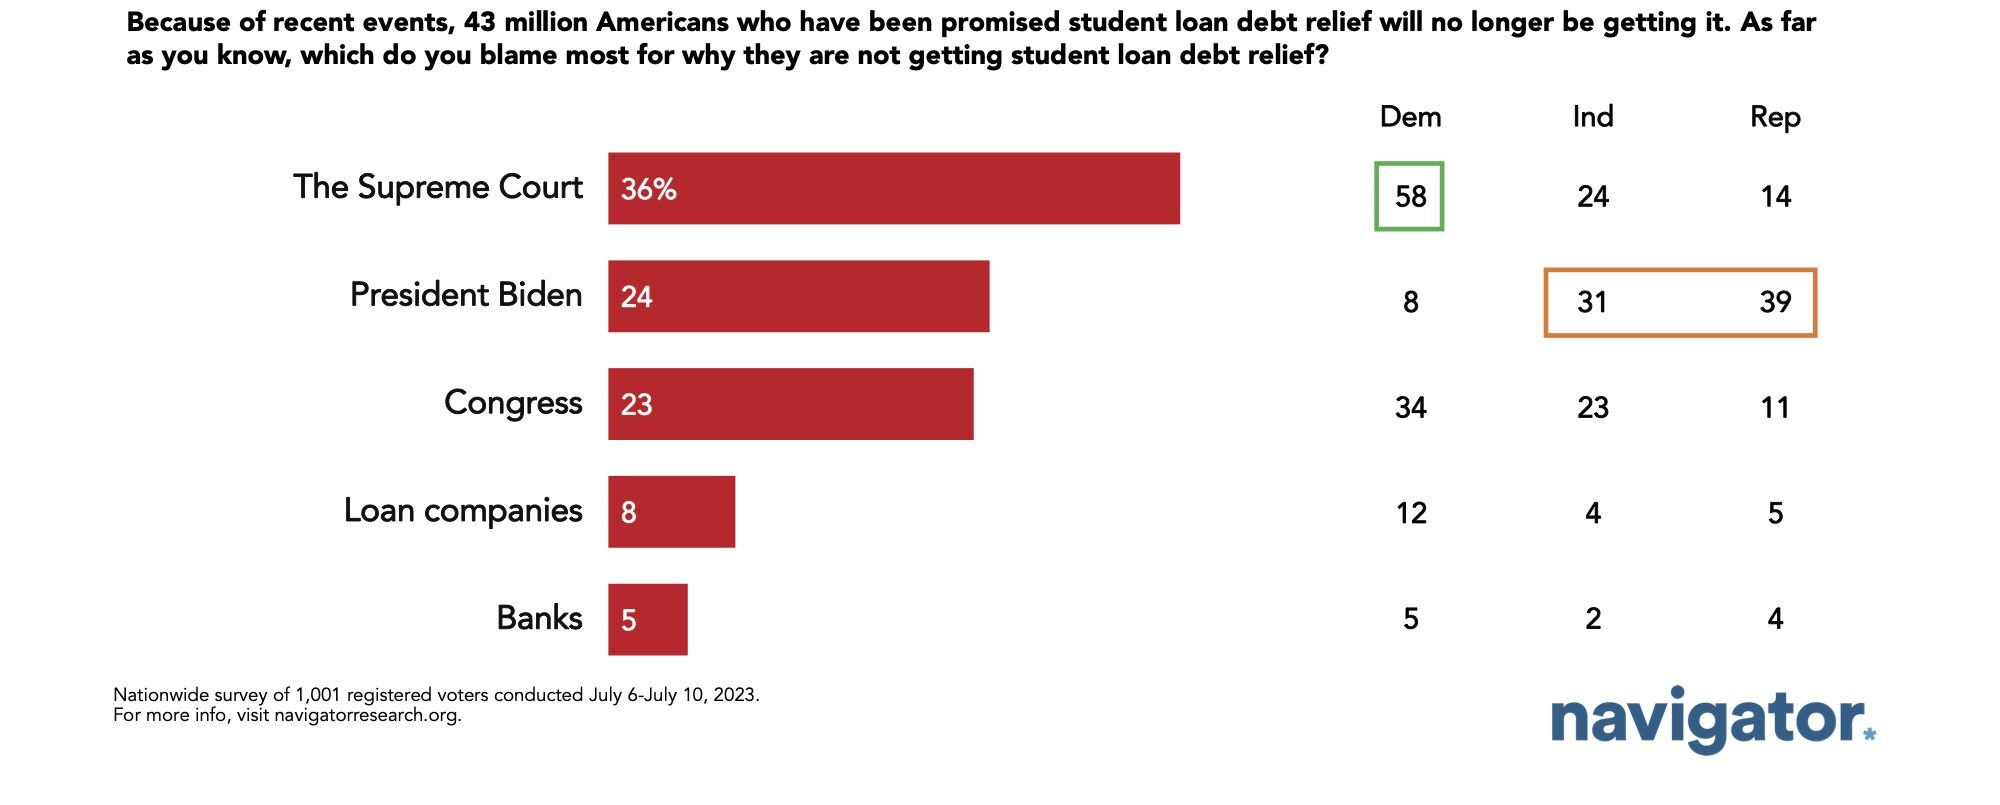 Survey results to the following prompt: Because of recent events, 43 million Americans who have been promised student loan debt relief will no longer be getting it. As far as you know, which do you blame most for why they are not getting student loan debt relief?